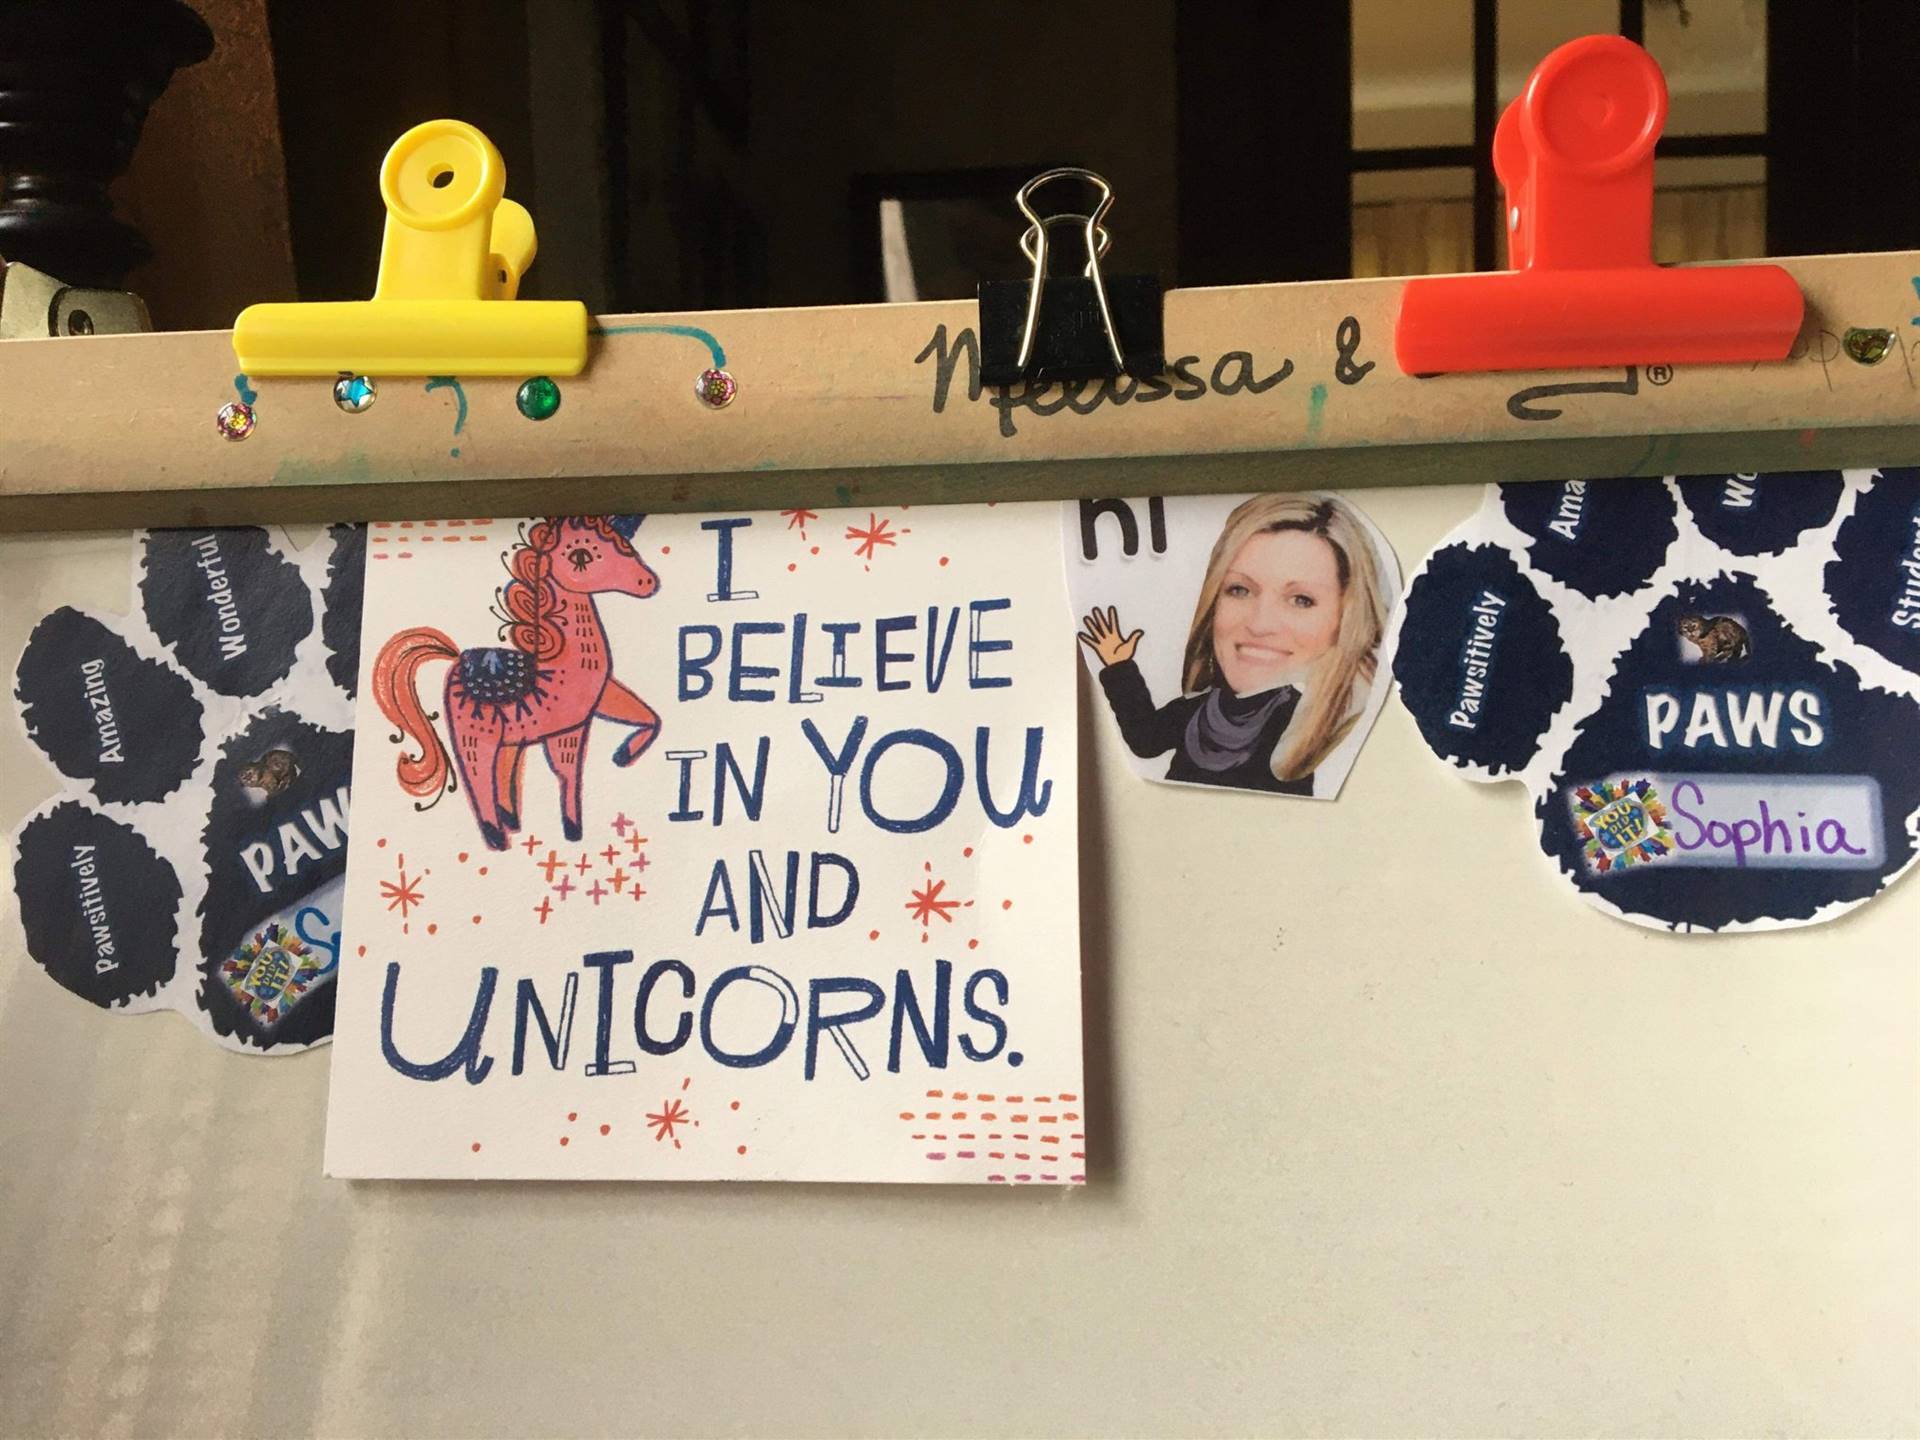 Paper face of teacher with "I believe in you and unicorns."